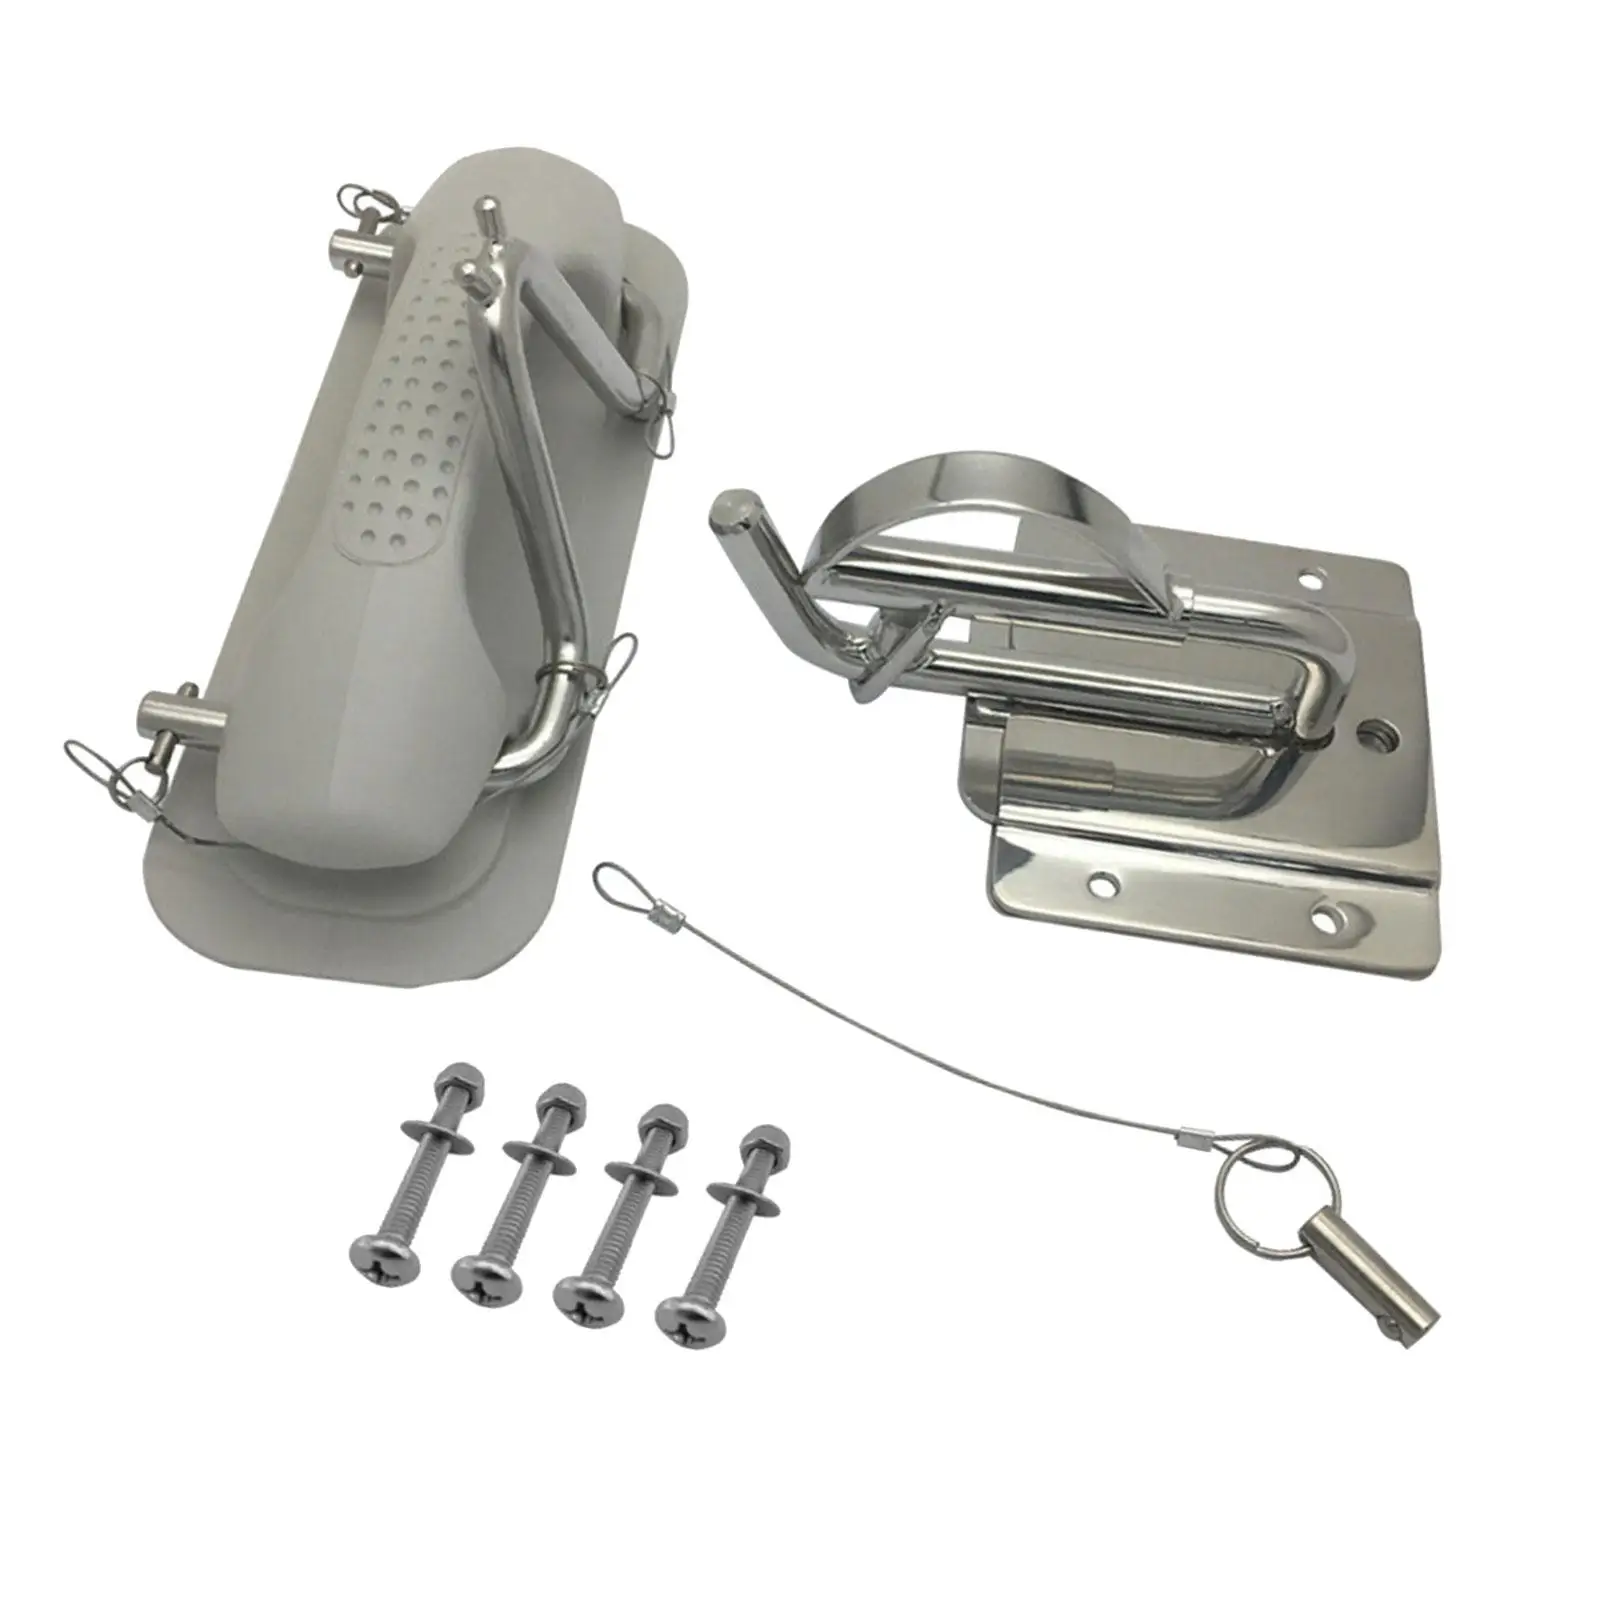 

Boat Snap Davits Set Boat Cleat Quick Davits System Strong Accessories Boat Grab Handle Durable Stainless Steel for Boat